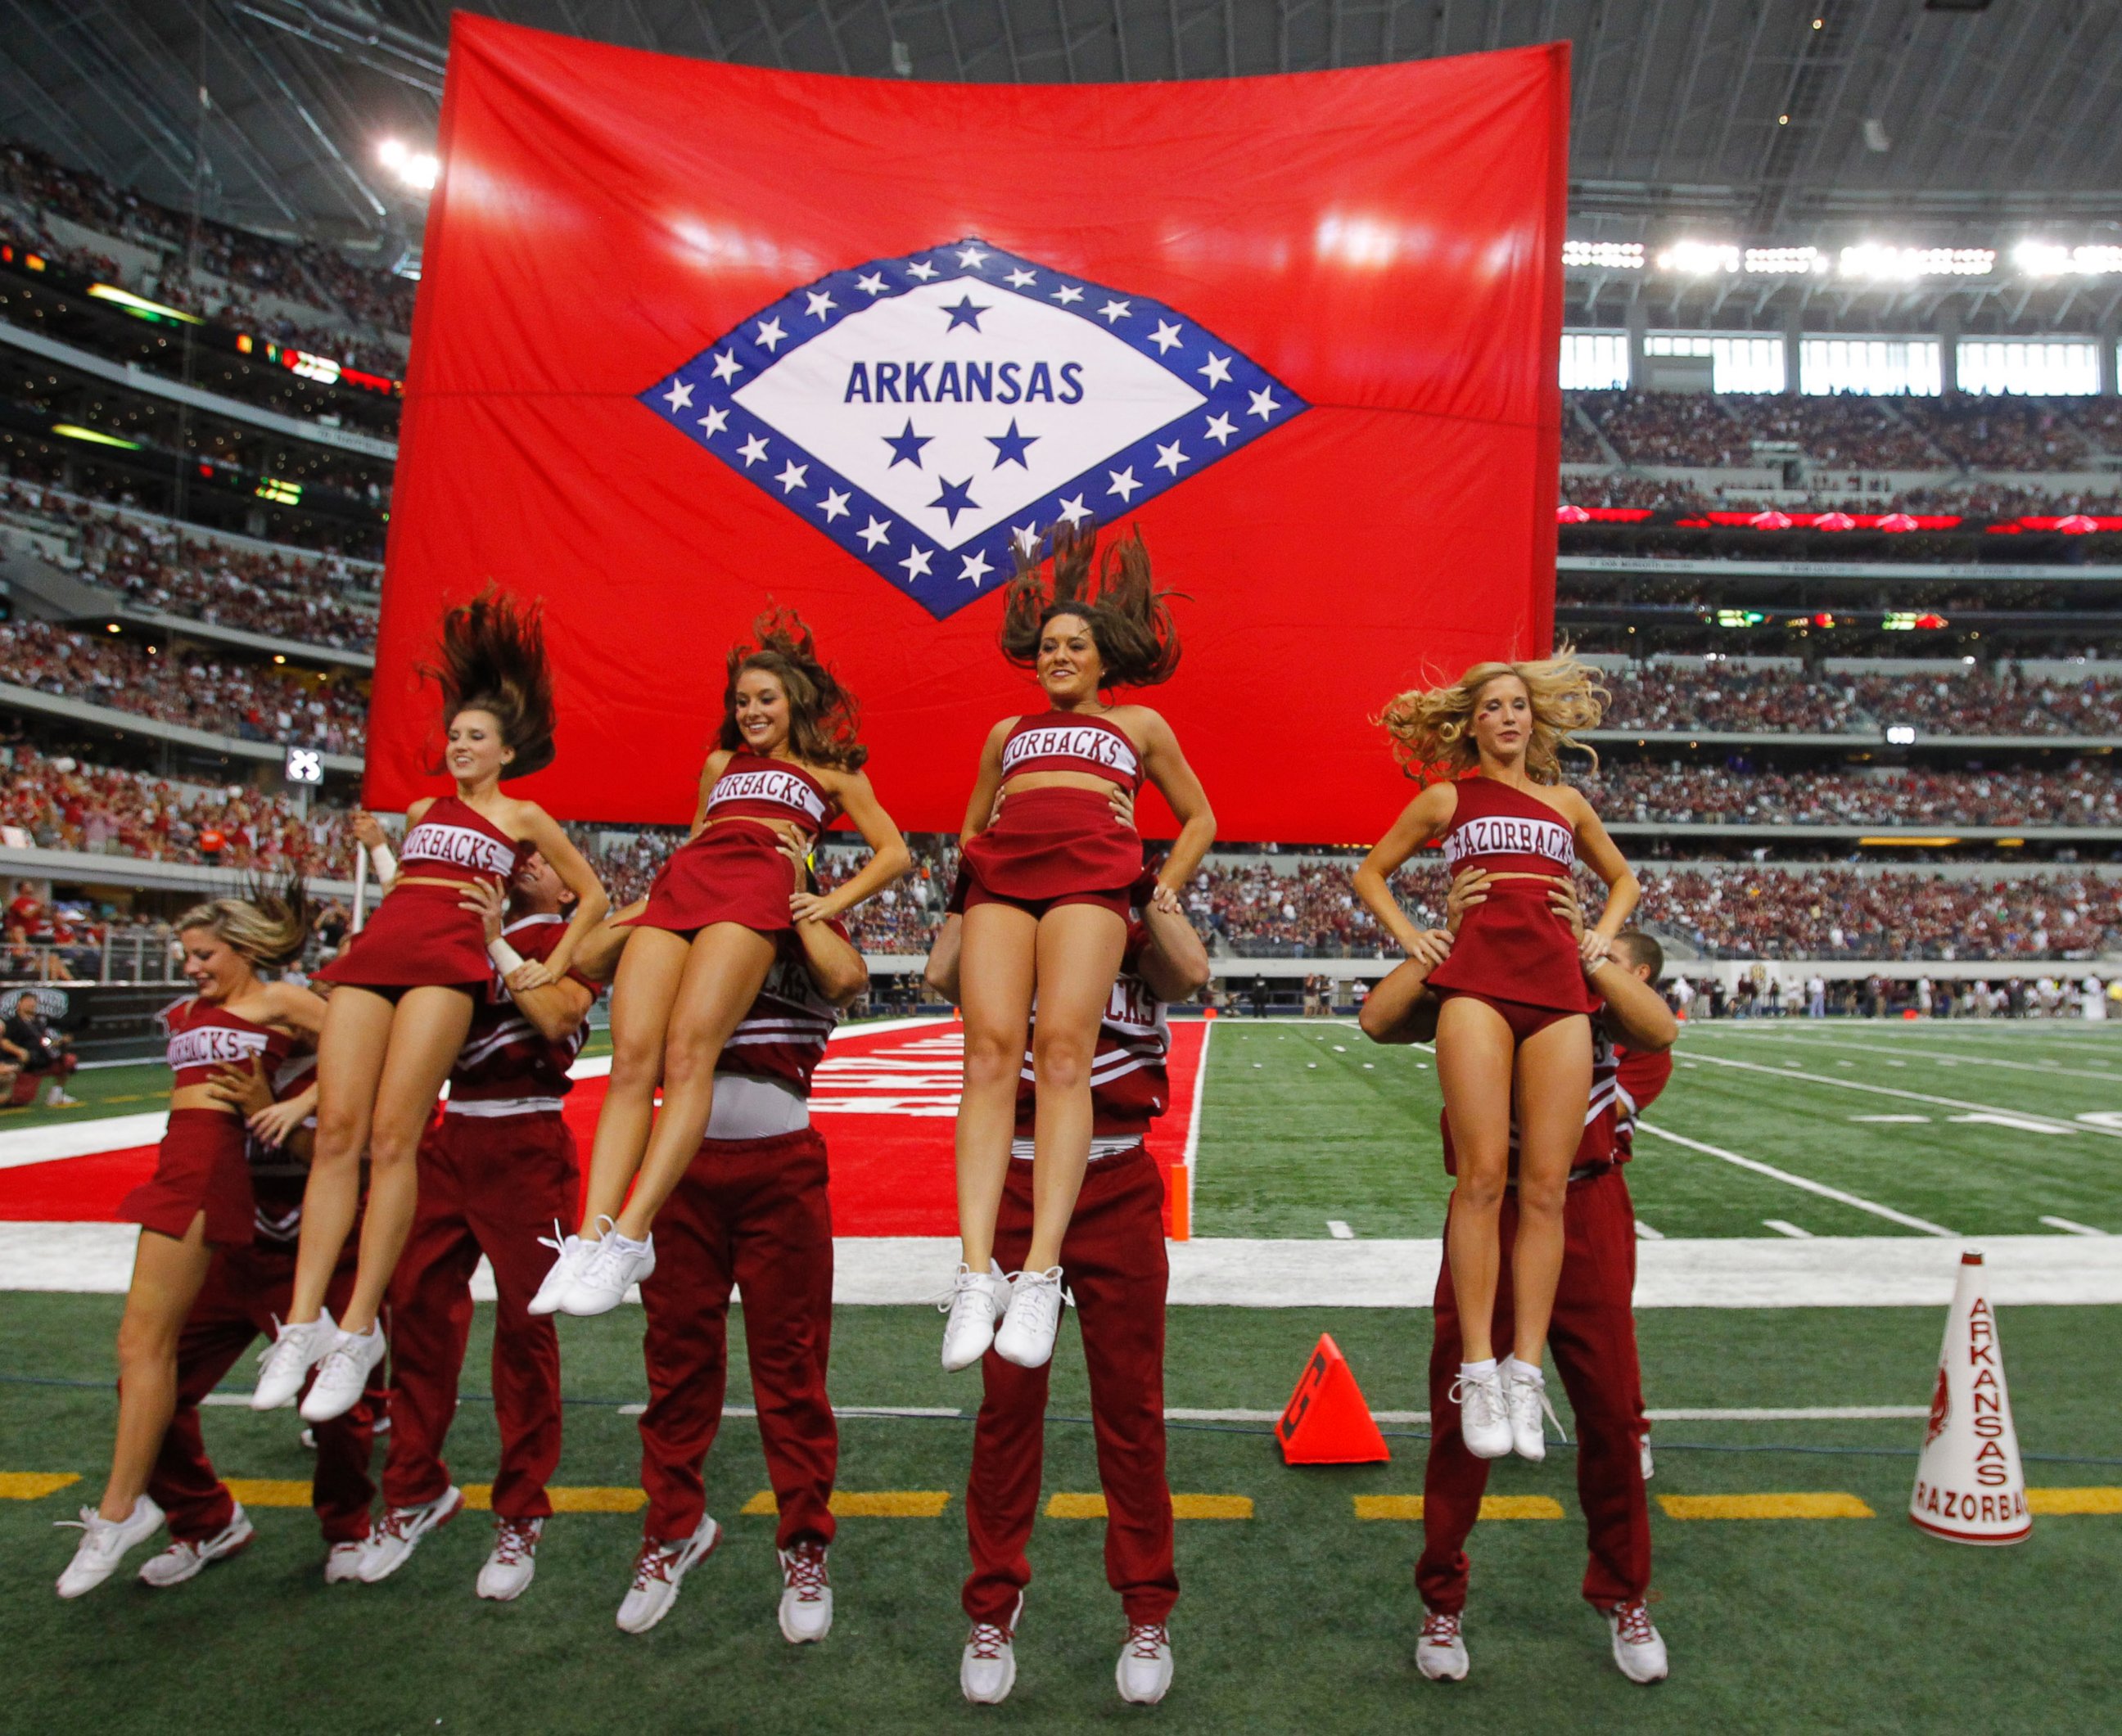 PHOTO: Arkansas cheerleaders perform a routine in front of their state flag at Cowboys Stadium in Arlington, Texas, on Oct. 1, 2011. 